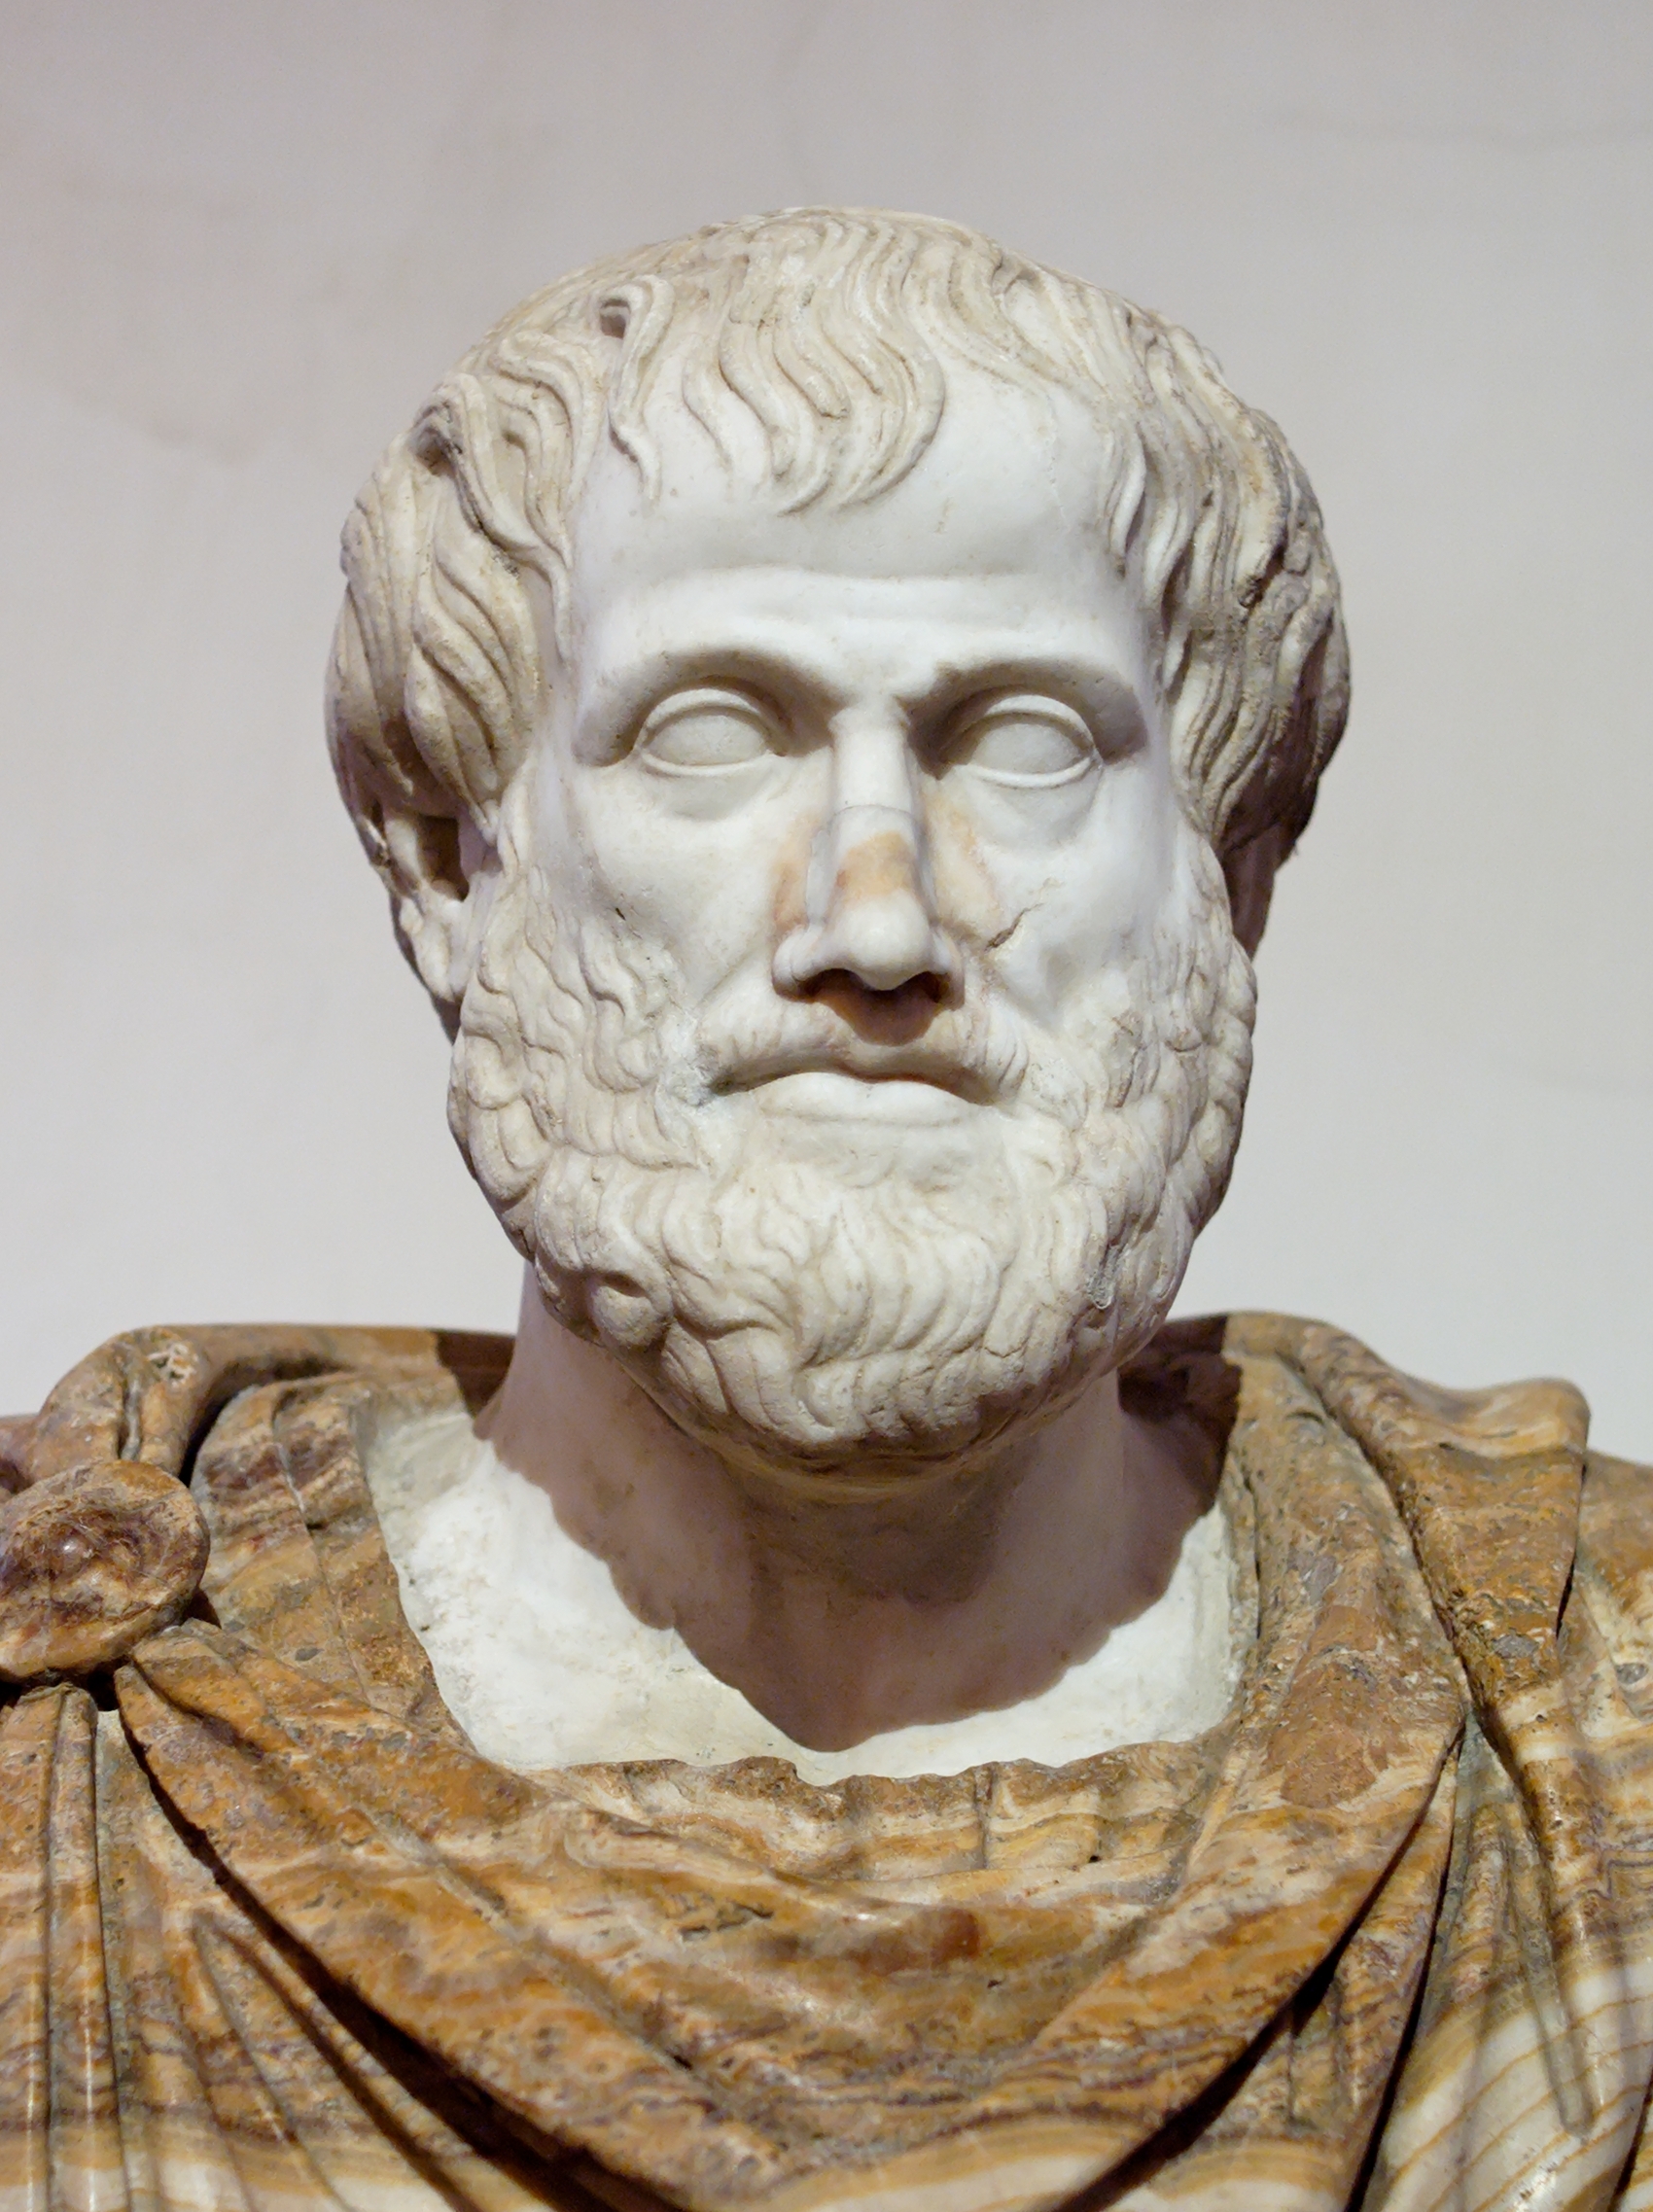 Aristotle  384 BC to 322 BC was a Greek philosopher and polymath, a student of Plato and teacher of Alexander the Great. His writings cover many subjects, including physics, metaphysics, poetry, theater, music, logic, rhetoric, linguistics, politics, government, ethics, biology, and zoology